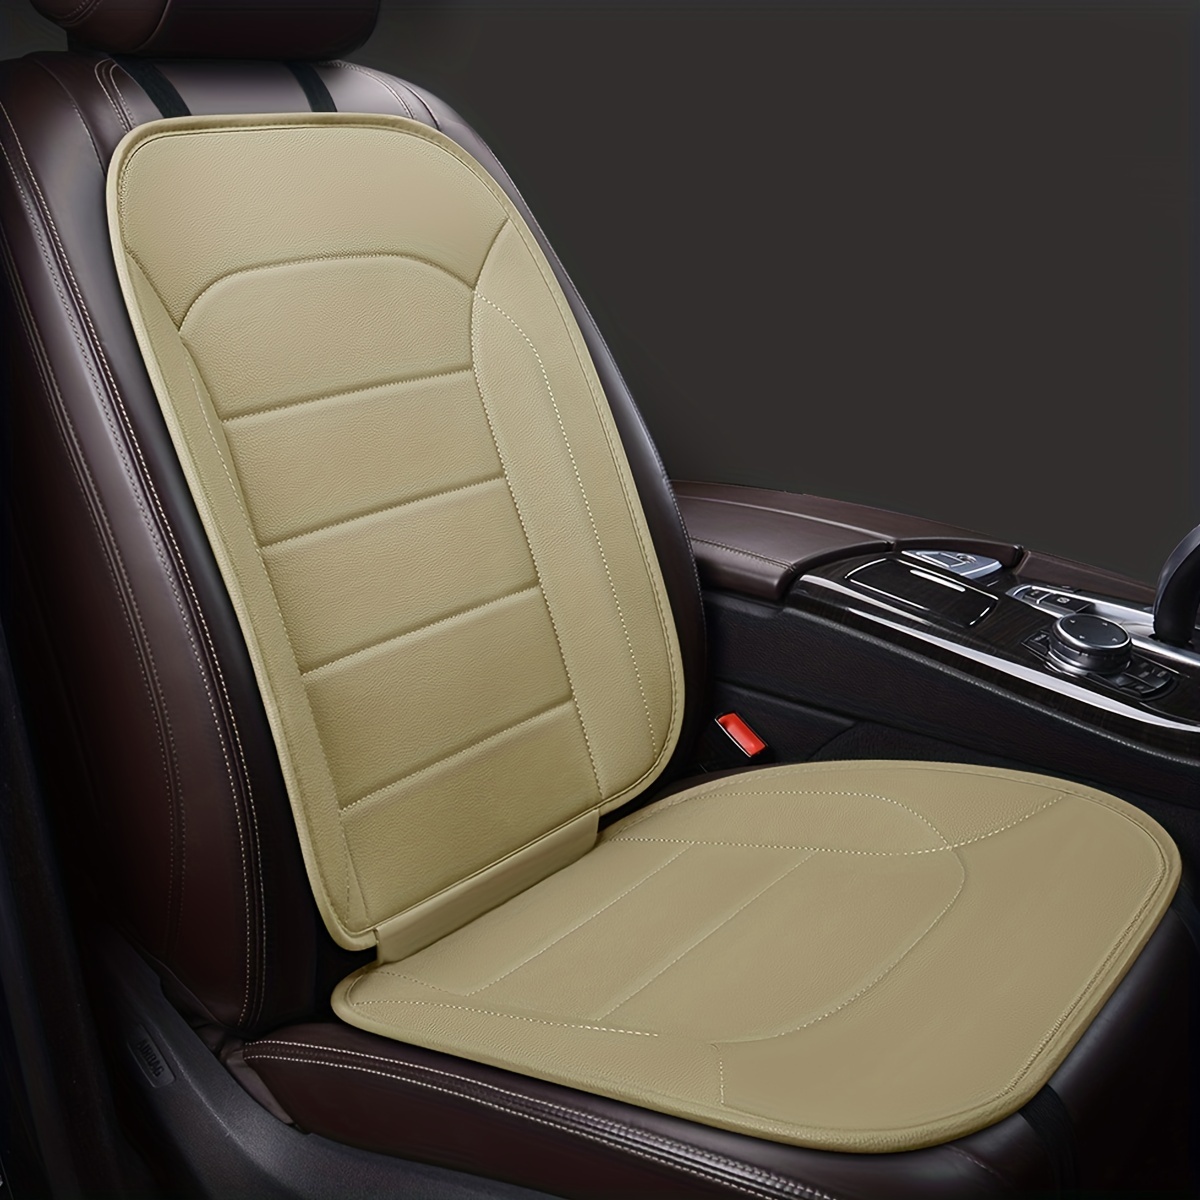 Luxury Car Seat Cover Beige Universal PU Leather Car Seat Covers Vehicle  Seat Cushion Protector Pad Auto Interior Accessories